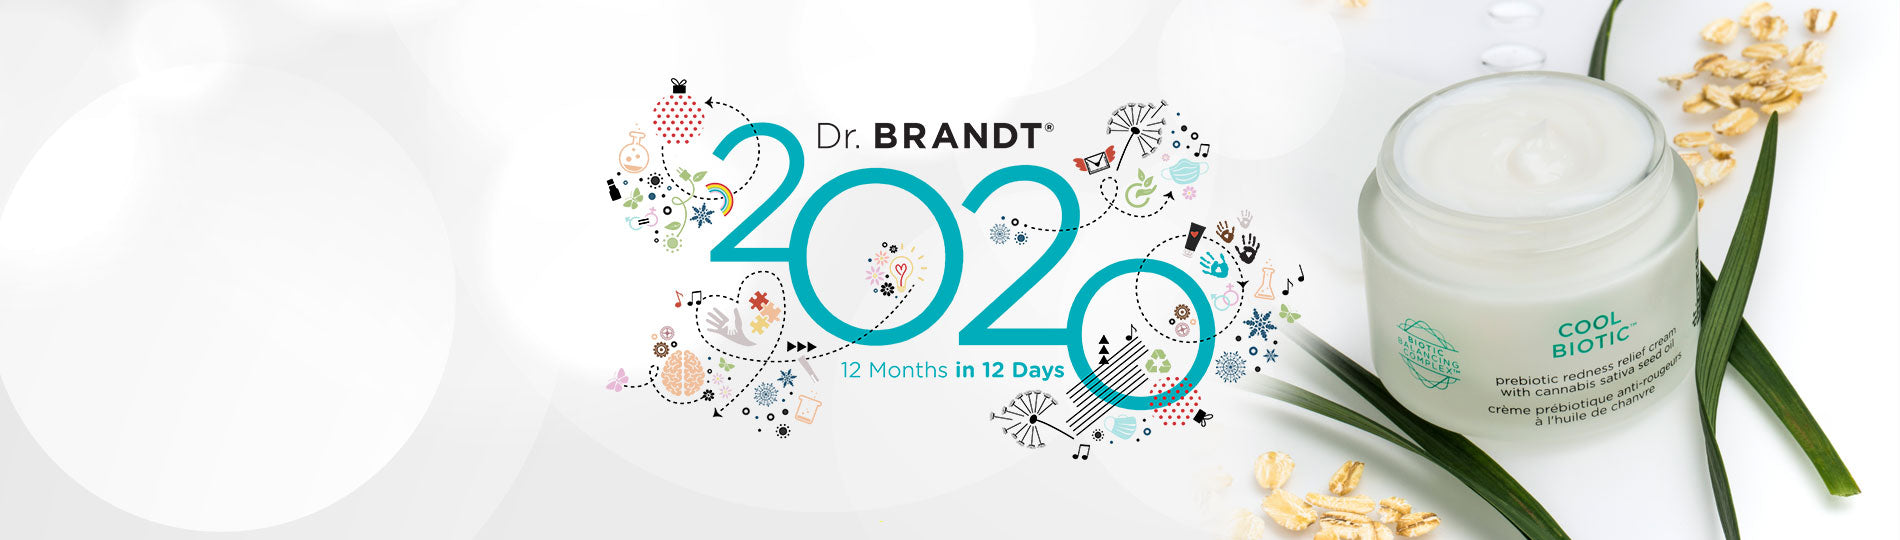 July: Did you celebrate your accomplishments this year? And a cooling entrance by Dr. BRANDT skincare